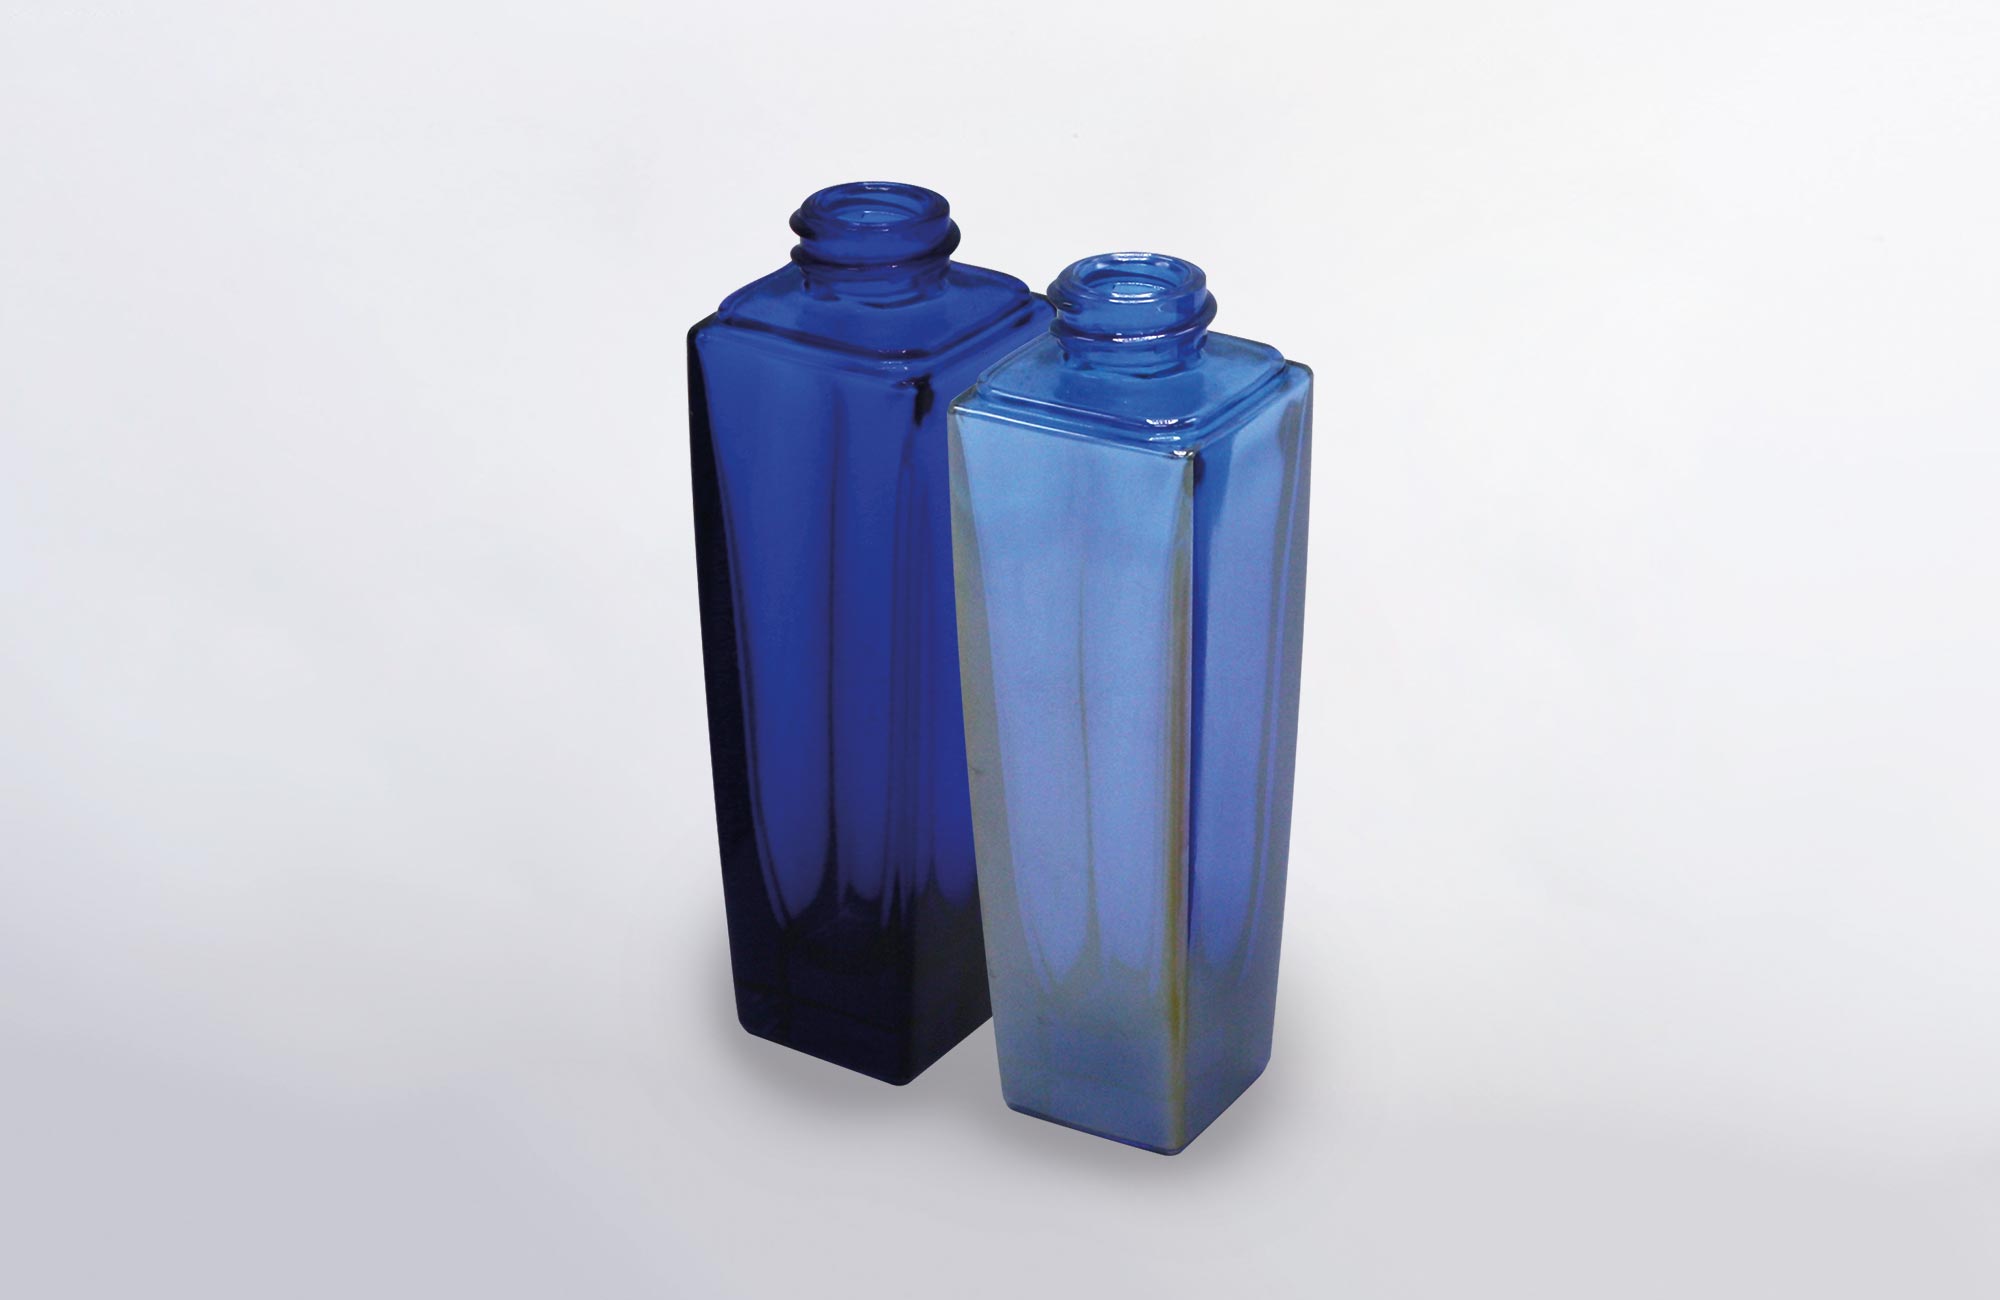 Stoelzle glass bottles with and without IPET surface treatment